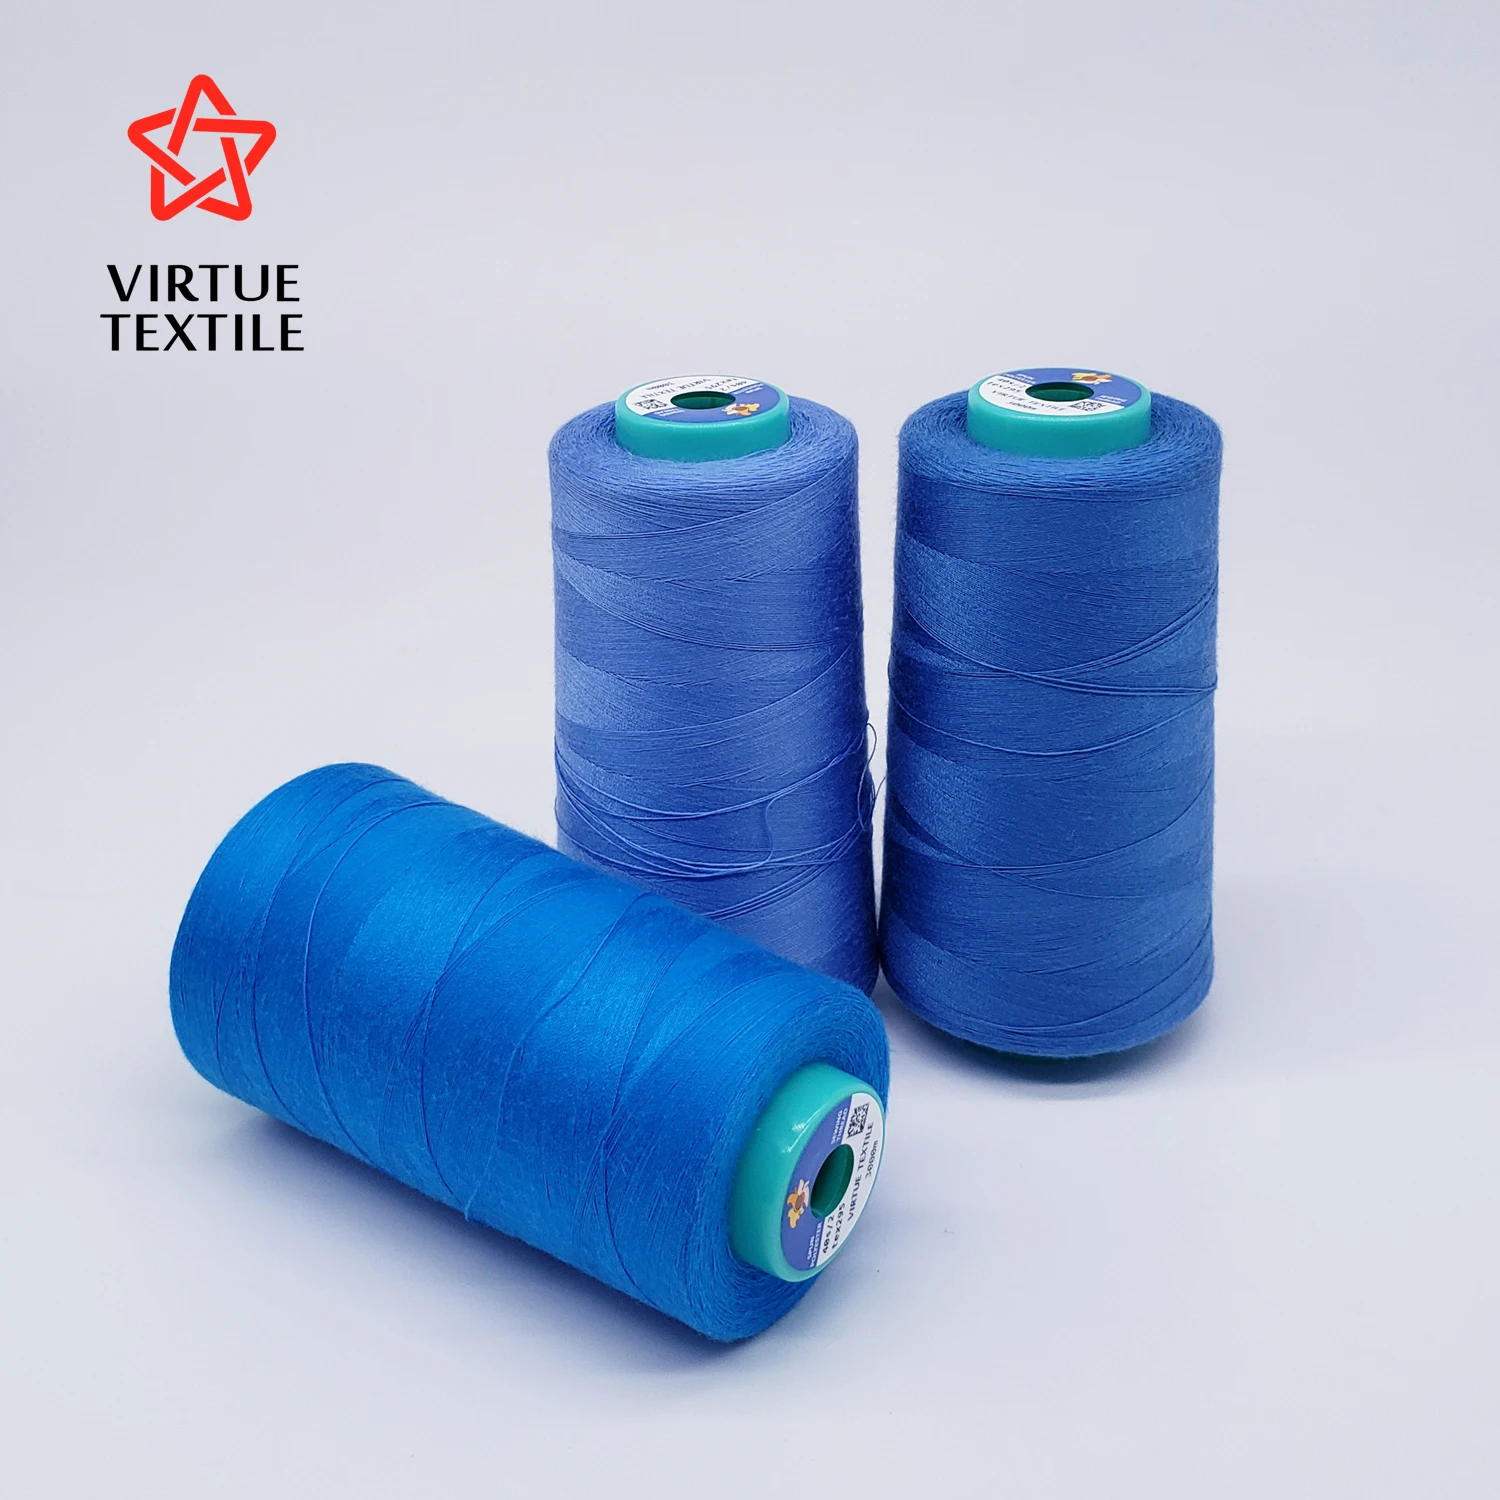 
100% poly poly core spun polyester sewing thread 40s/2 